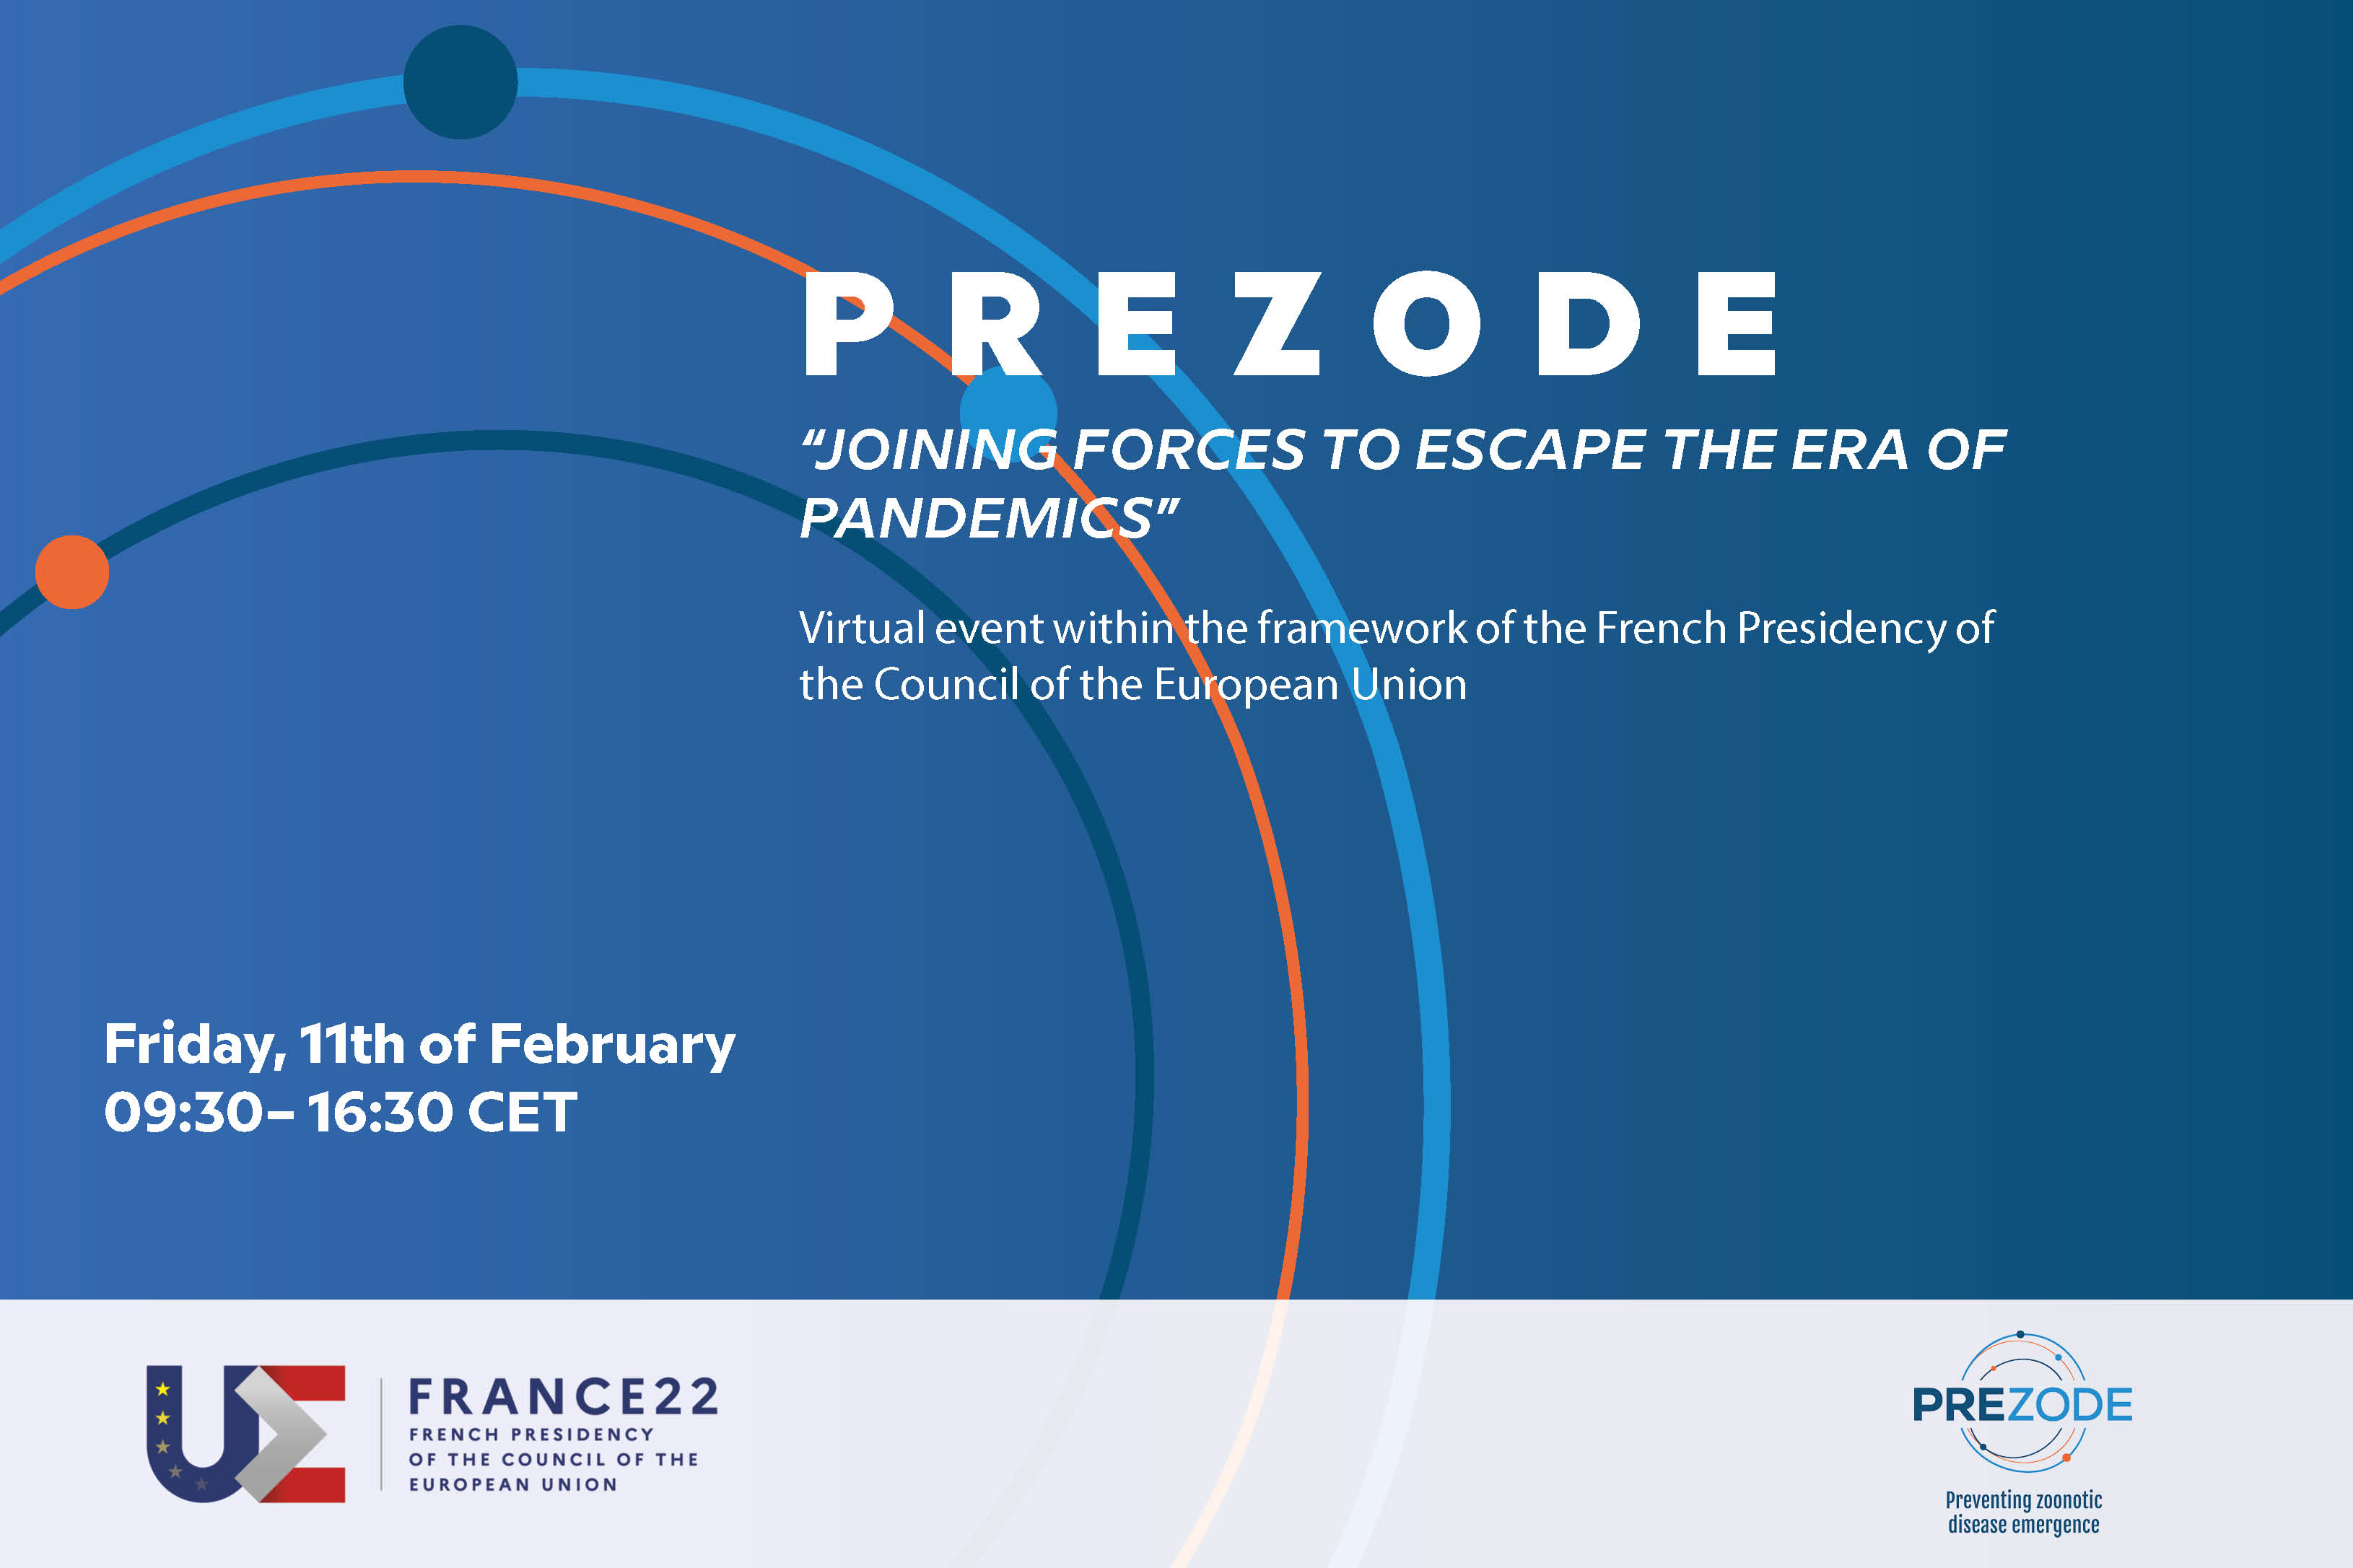 EVENT - JOINING FORCES TO ESCAPE THE ERA OF PANDEMICS